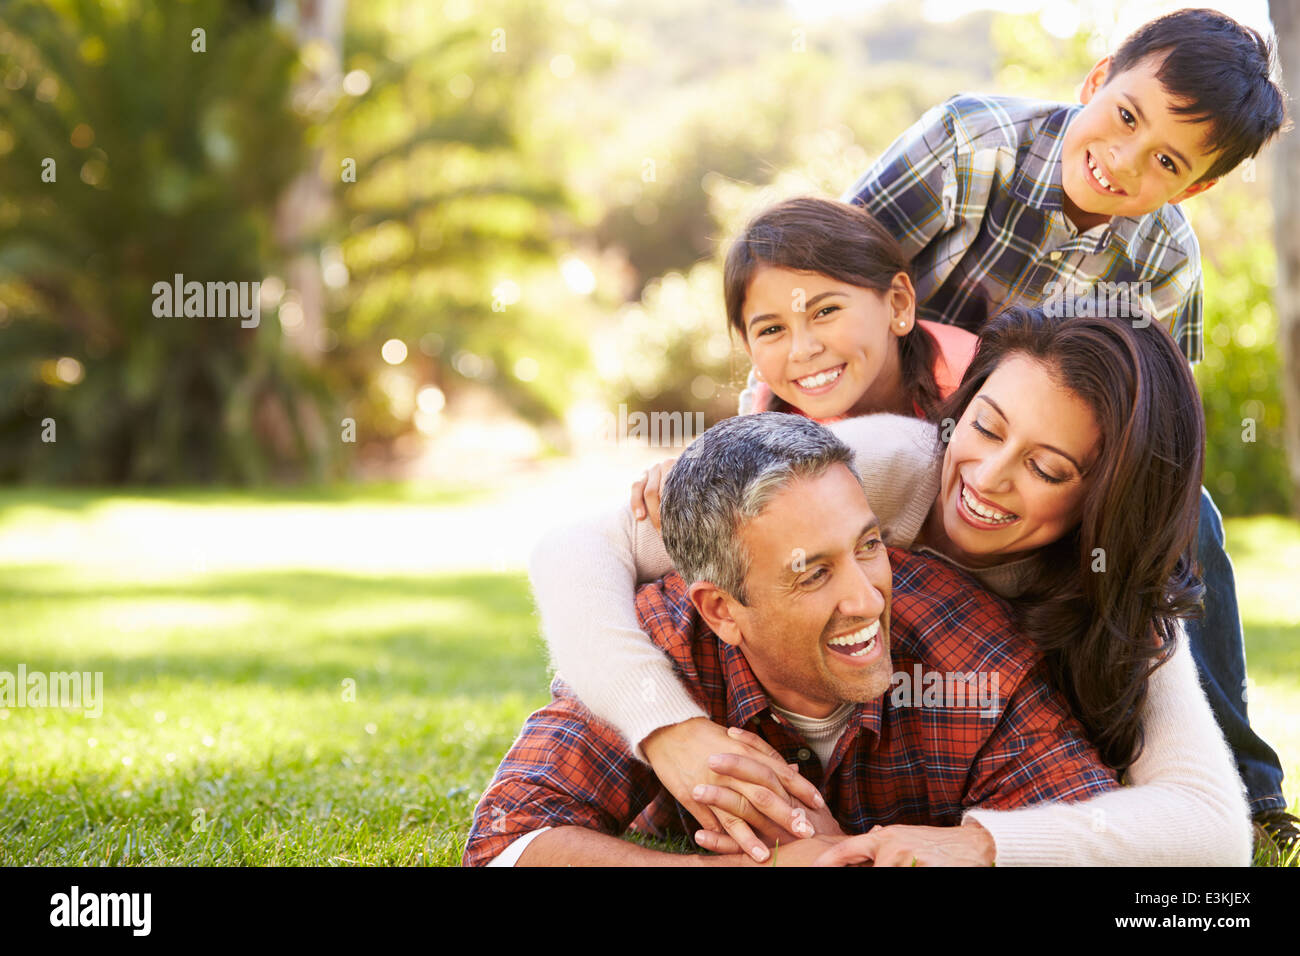 Family Lying On Grass In Countryside Stock Photo